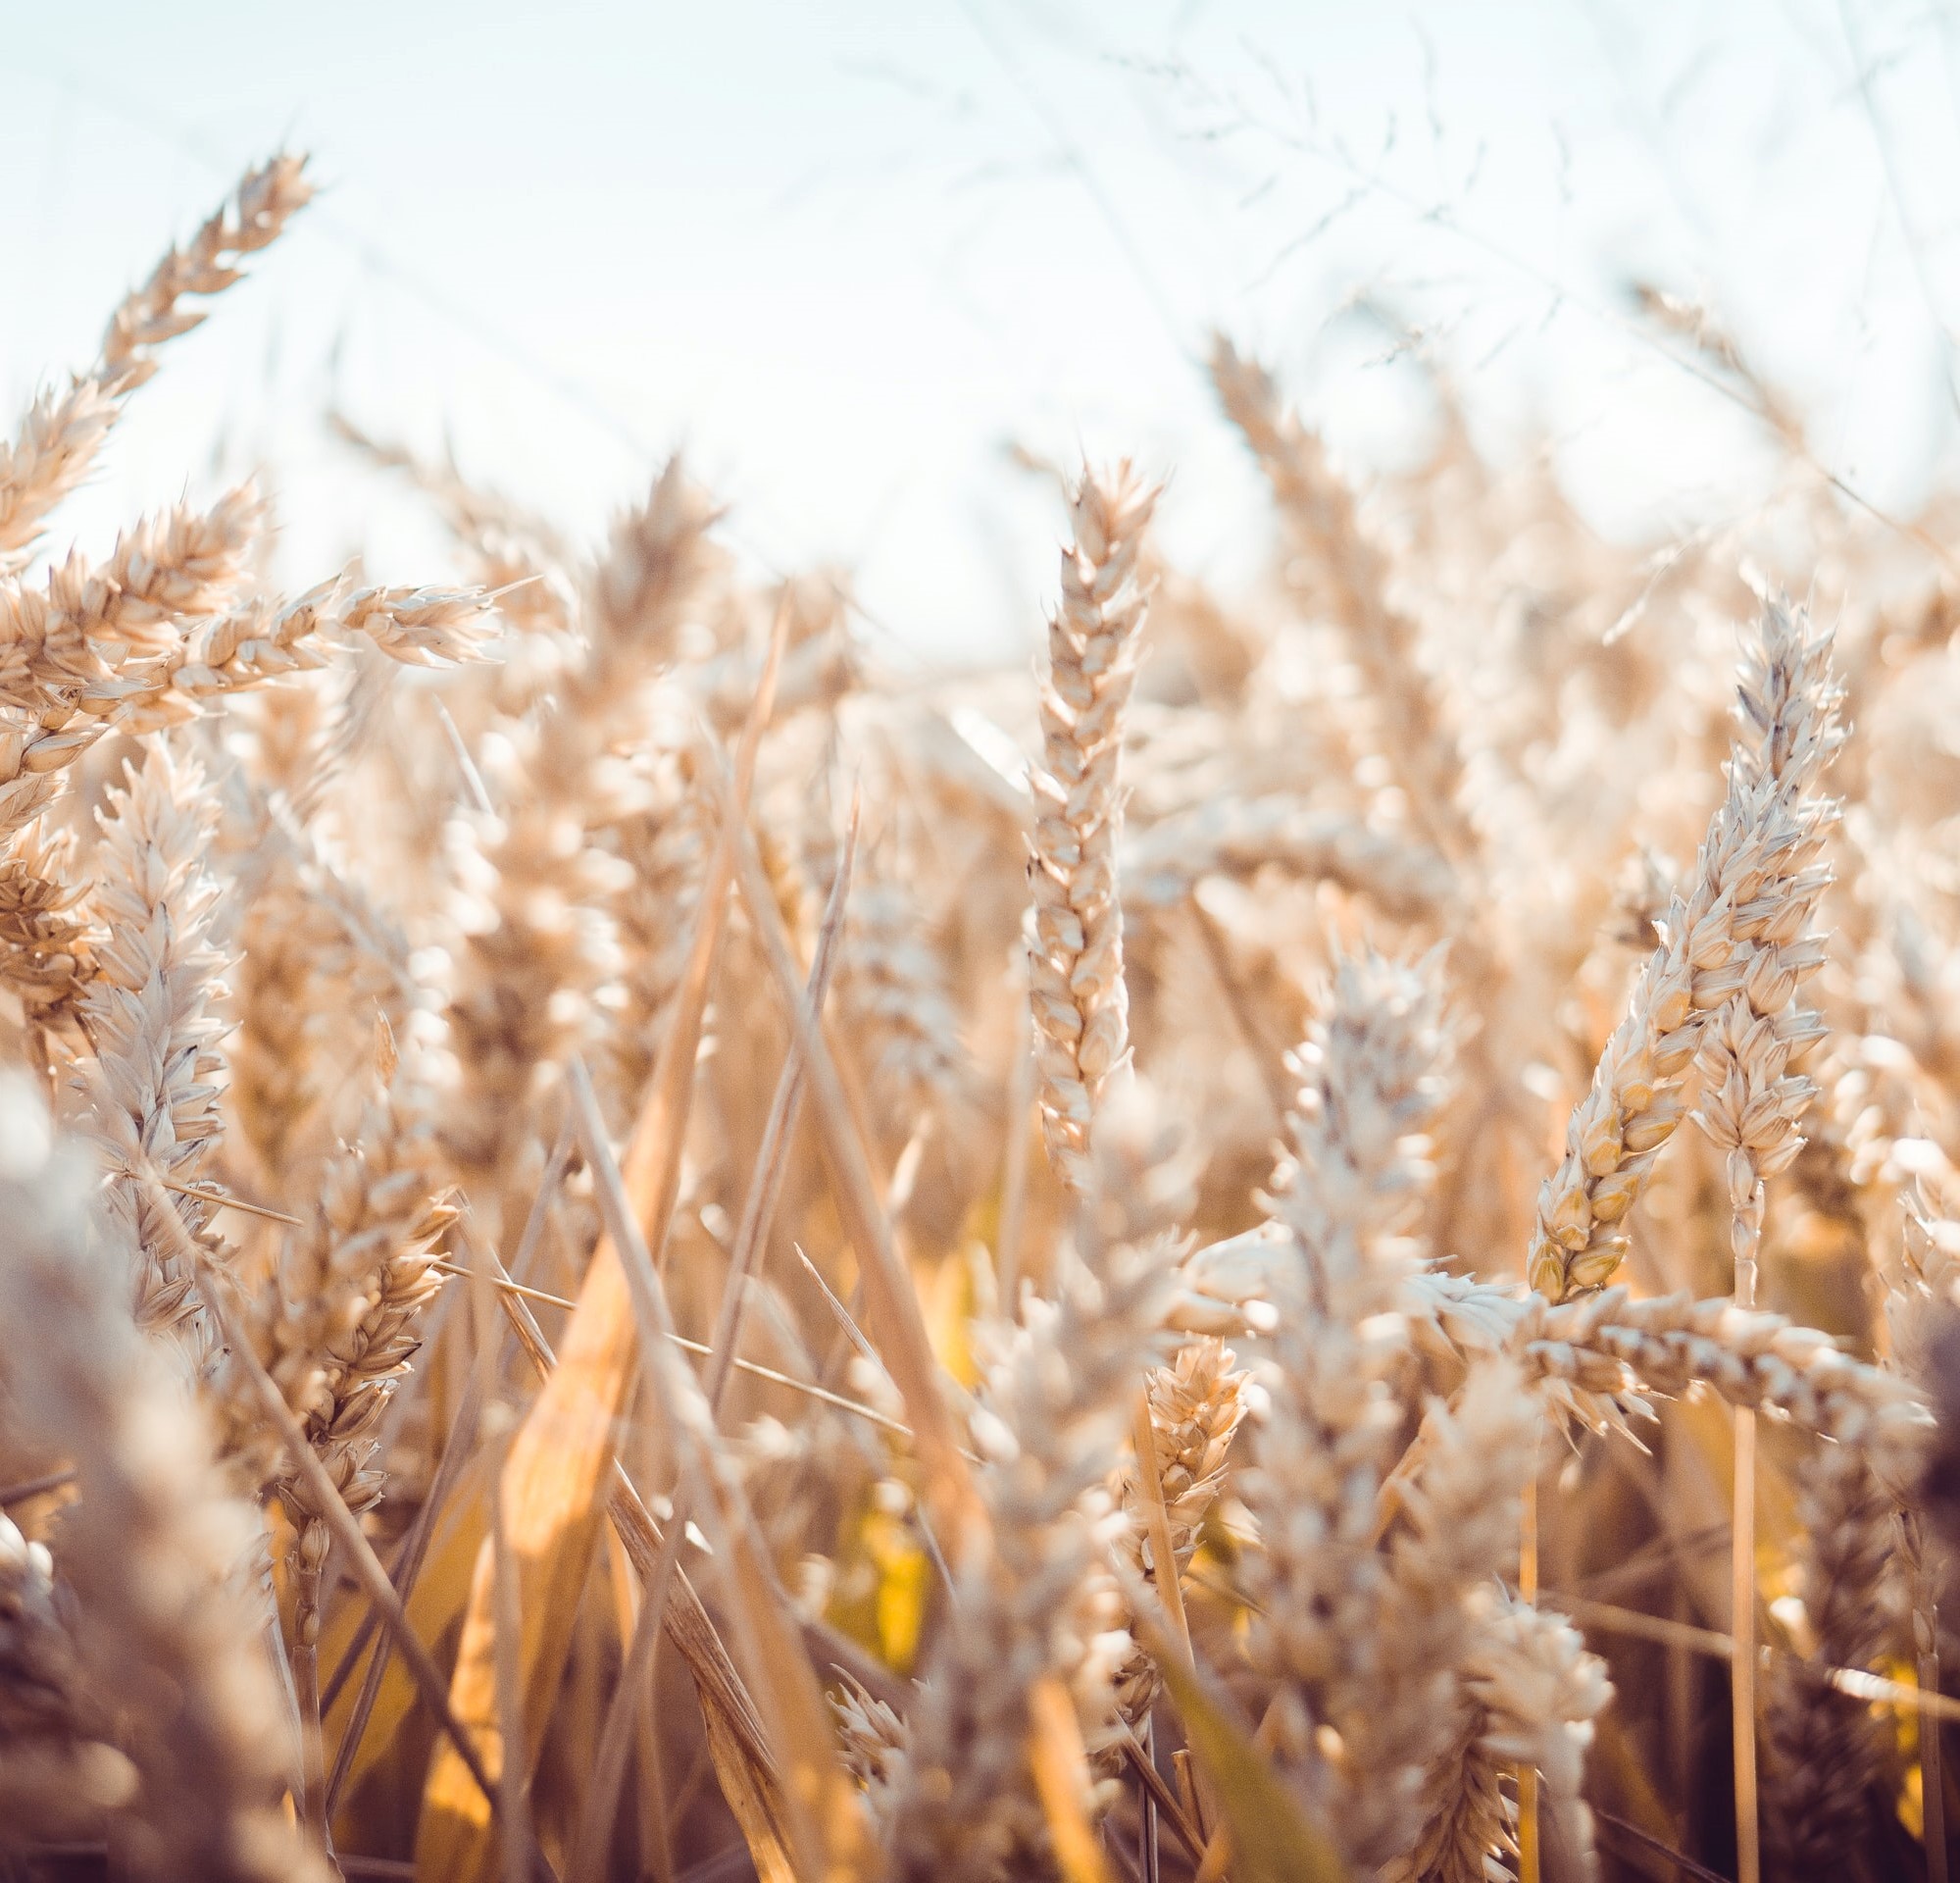 Uncertainty in Wheat Supply Pressures Emerging Markets